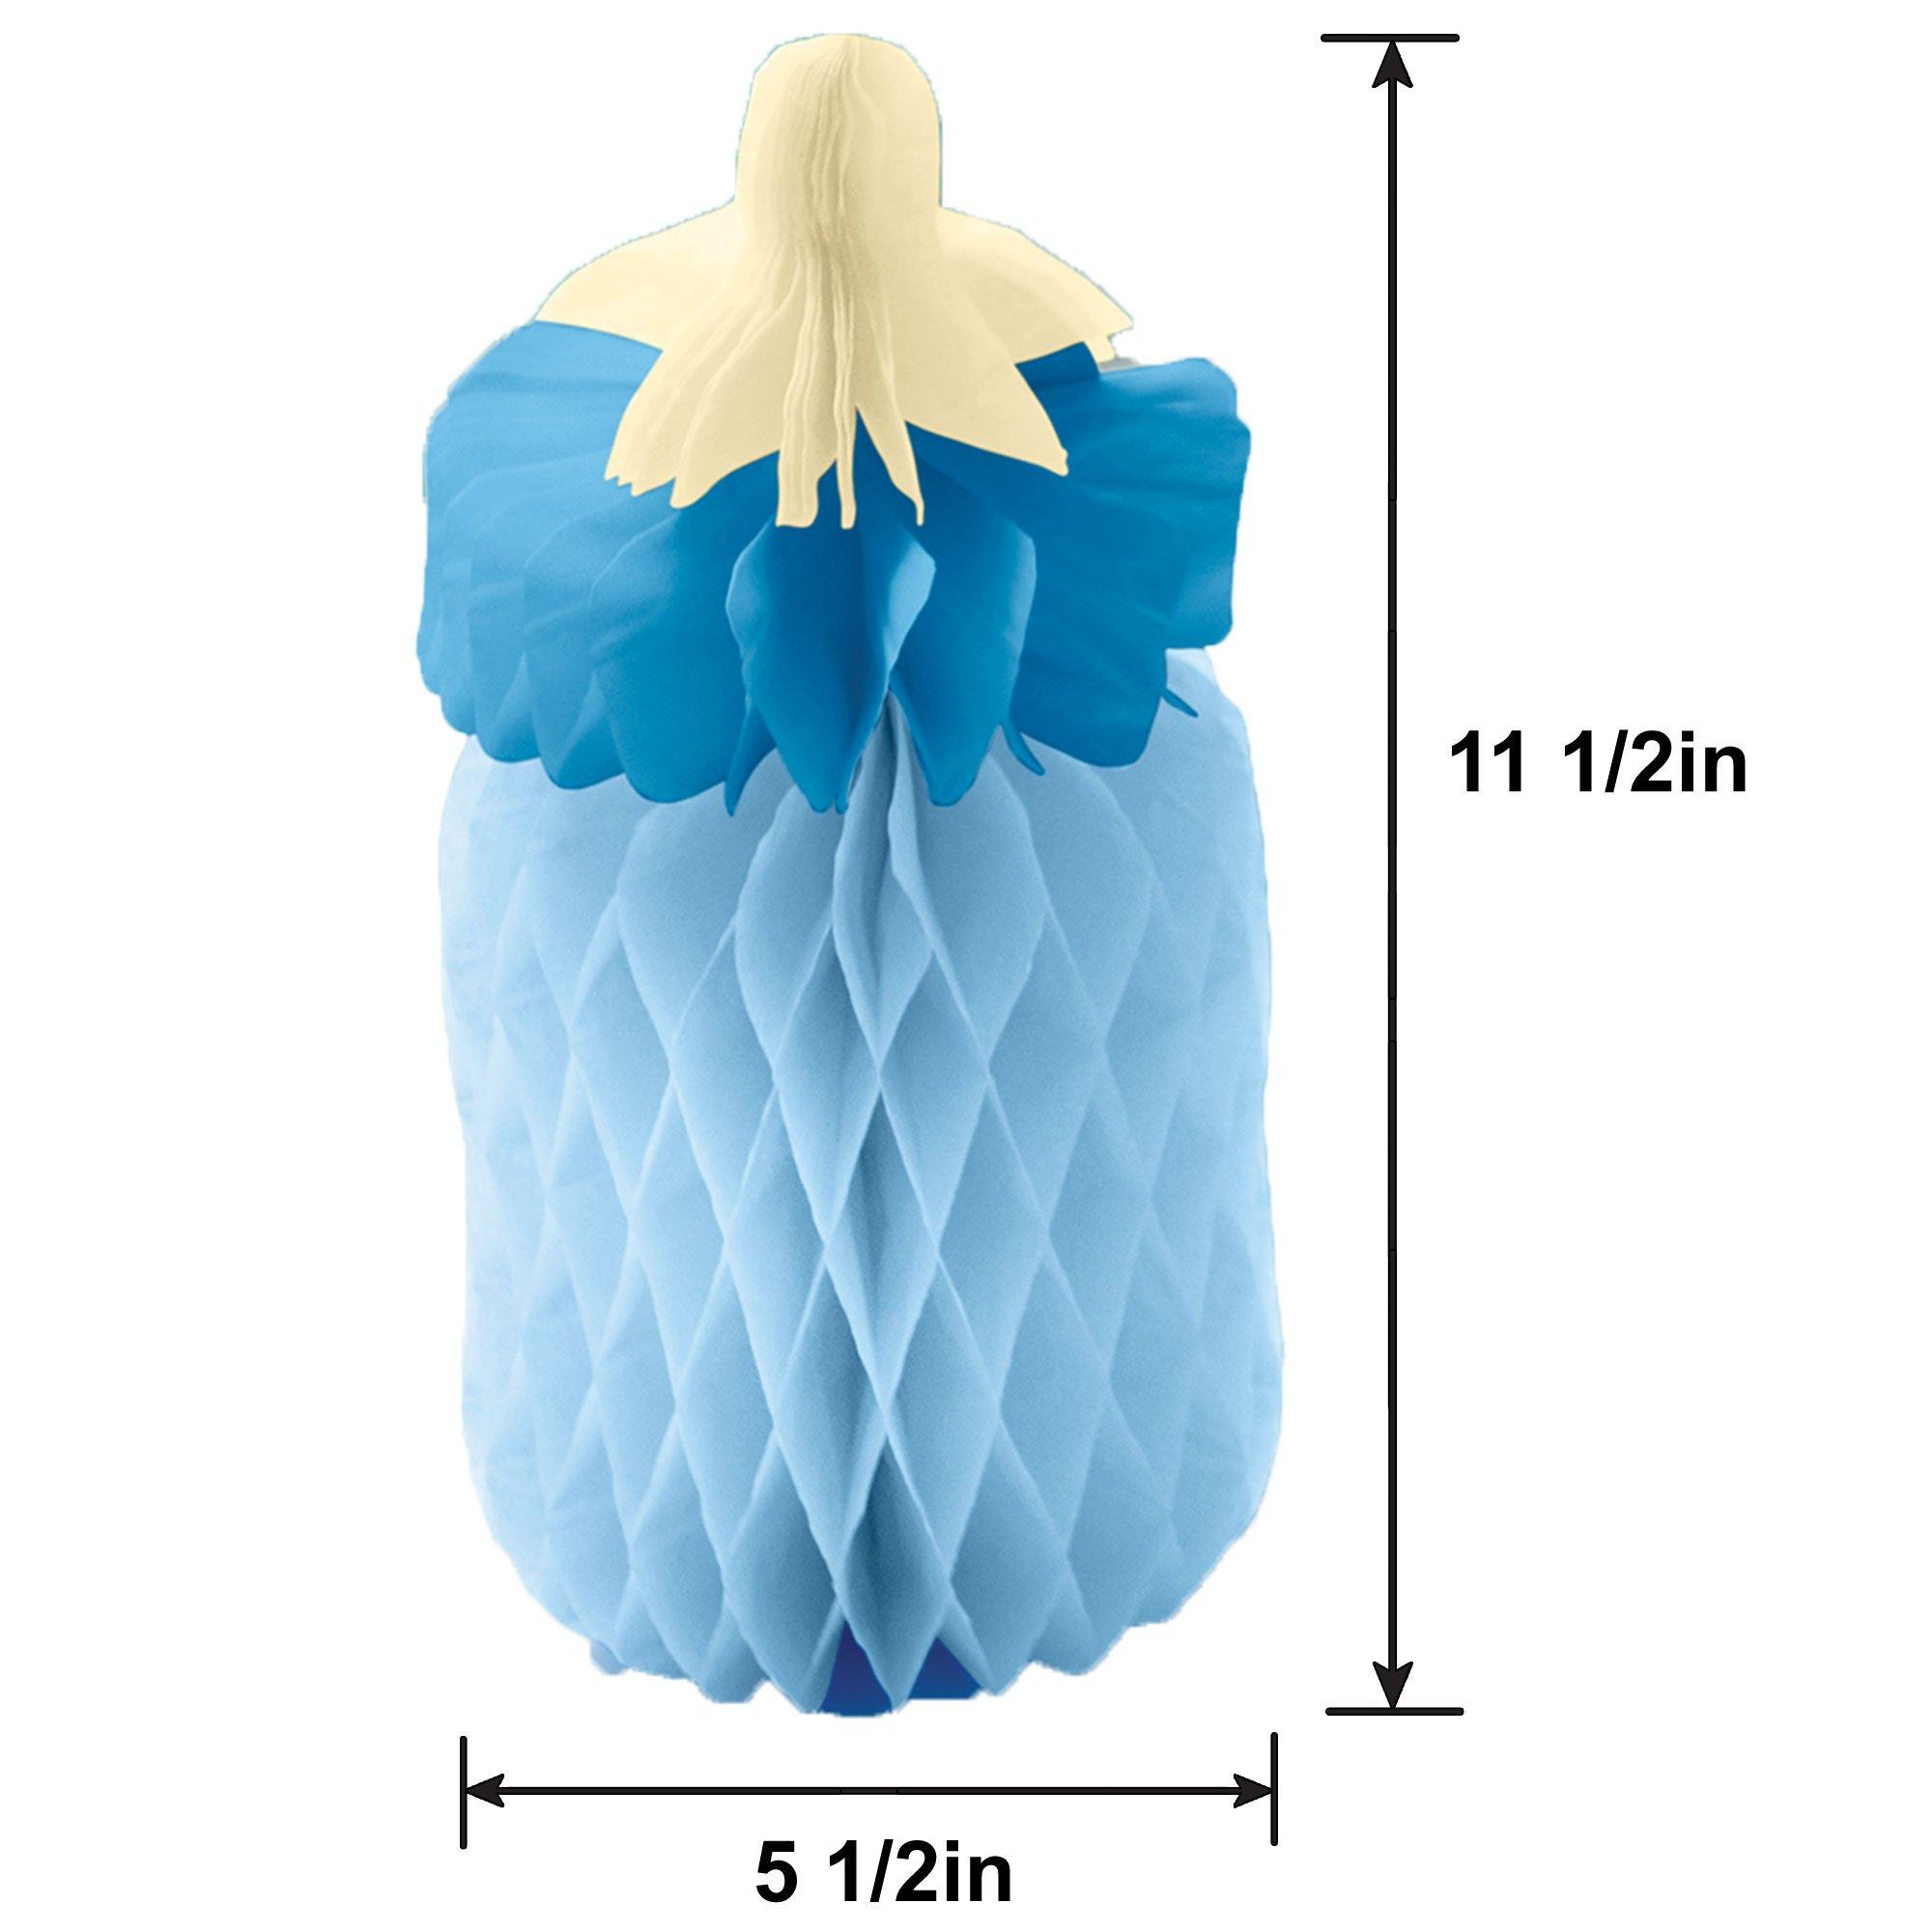 Blue Bottle Baby Shower Honeycomb Centerpieces, 11.5in, 4pc - Oh Baby! Boy